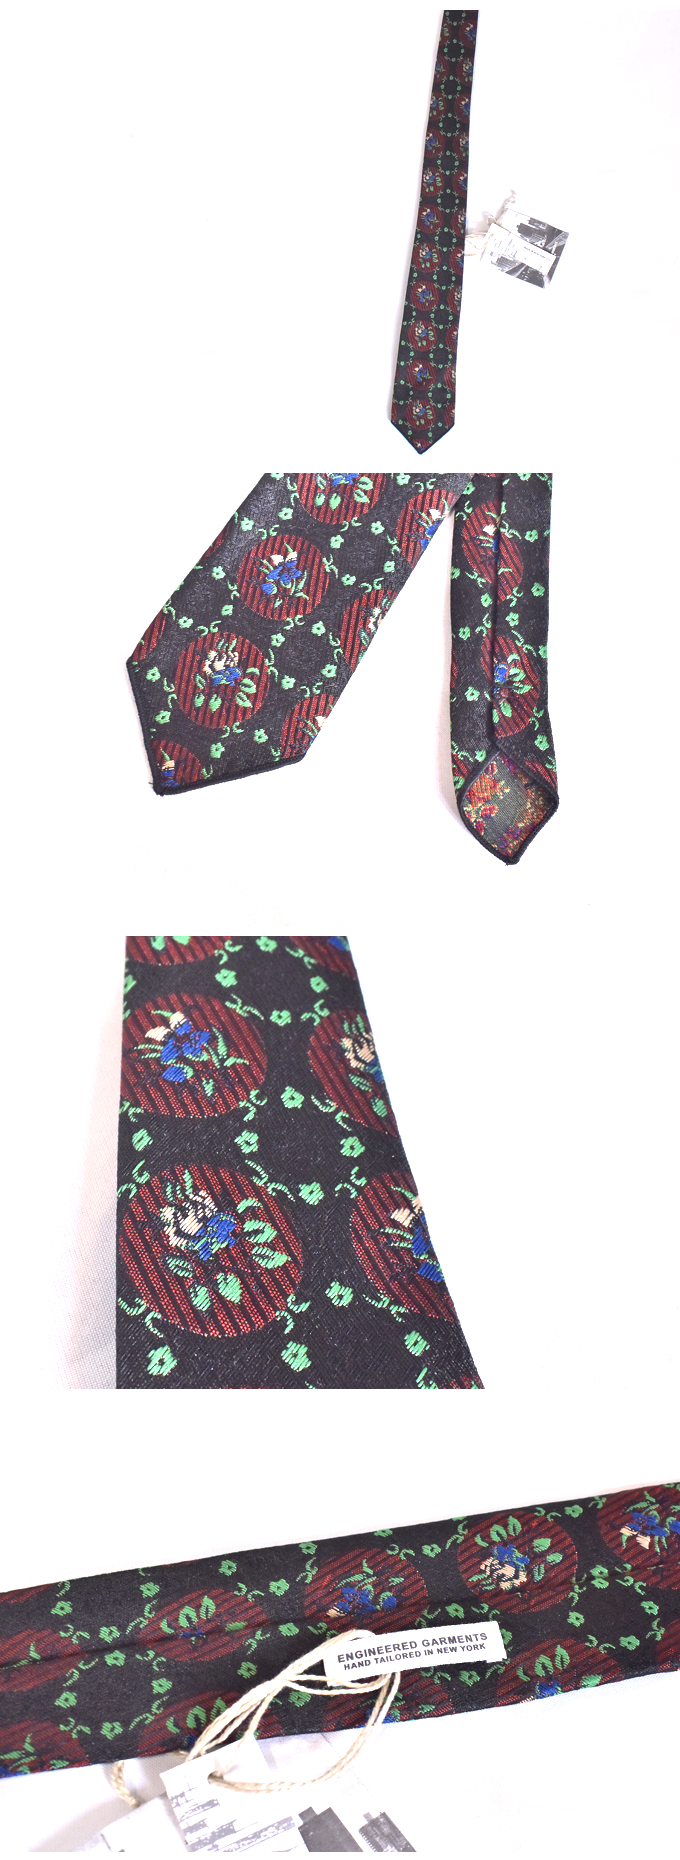 ENGINEERED GARMENTS Neck Tie - Polyester Floral Jacquard